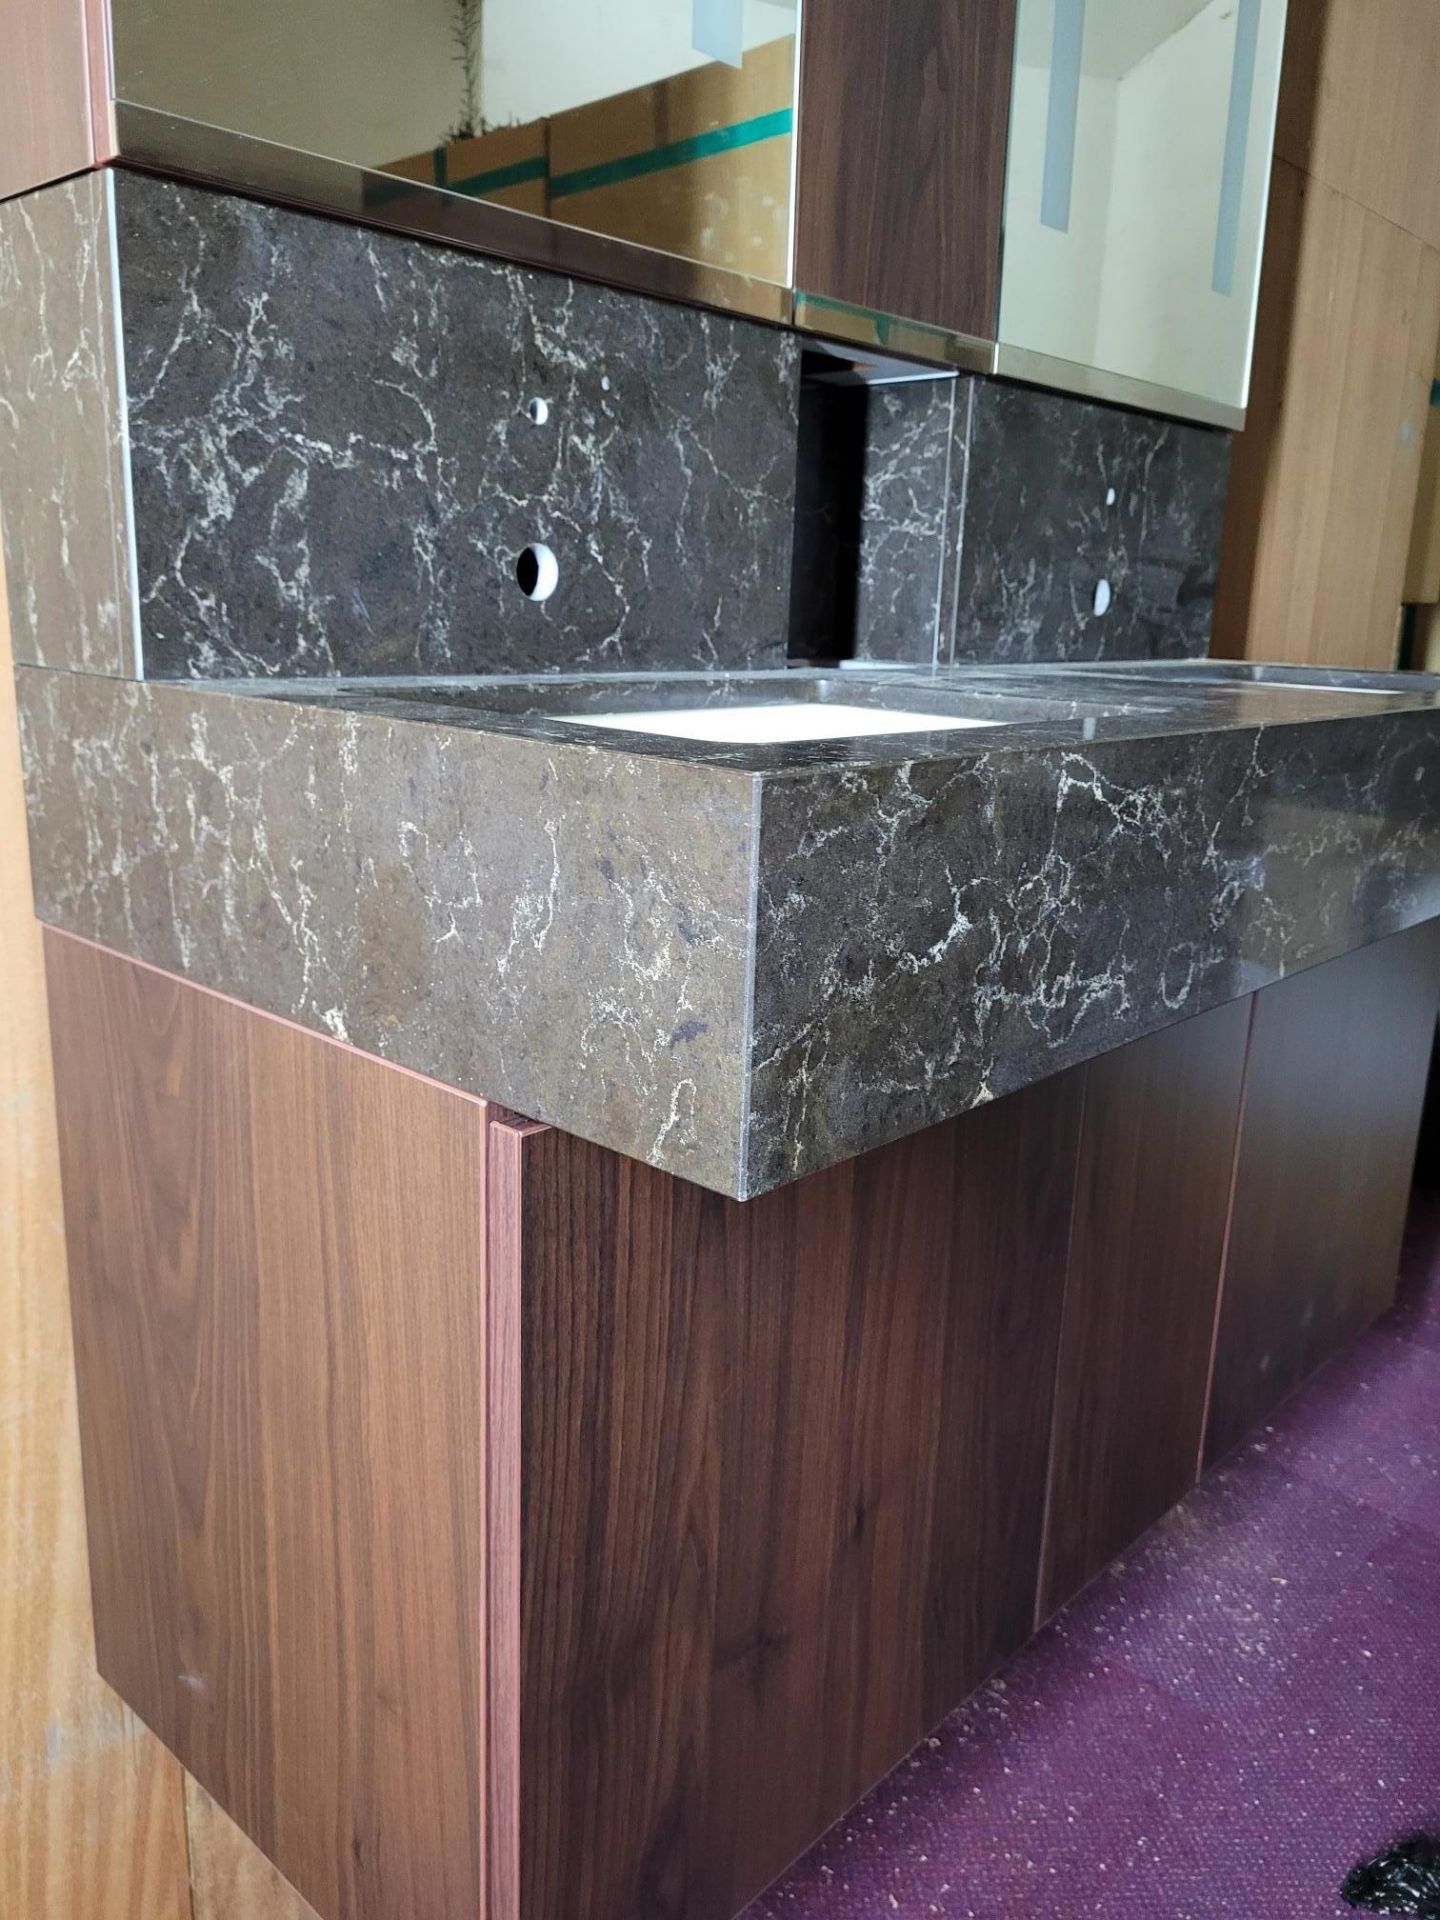 Bespoke twin basin black variegated granite bathroom sink unit, with mirrored cabinets, - Image 9 of 11